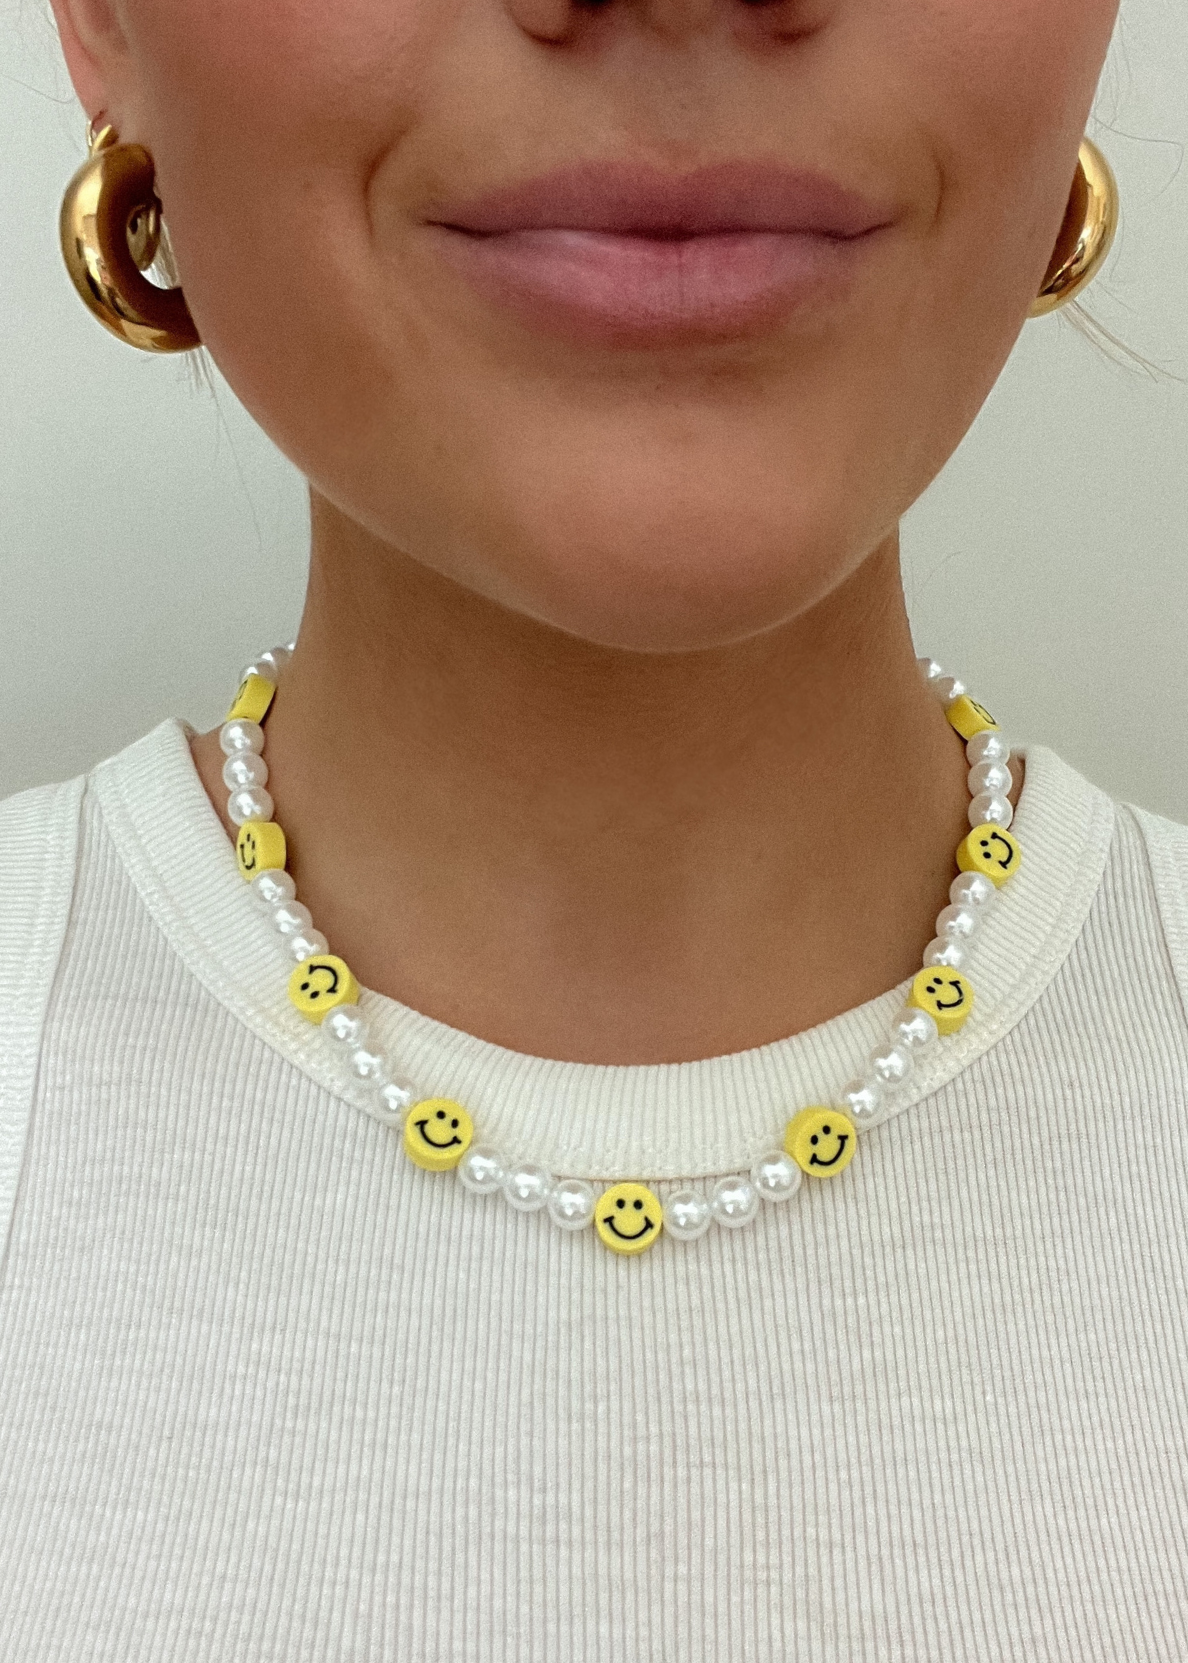 Smiley Face Beads pearl Necklace Handmade y2k Irregular Imitation Pearl  Strands Necklace with Charm: Buy Online at Best Price in UAE - Amazon.ae